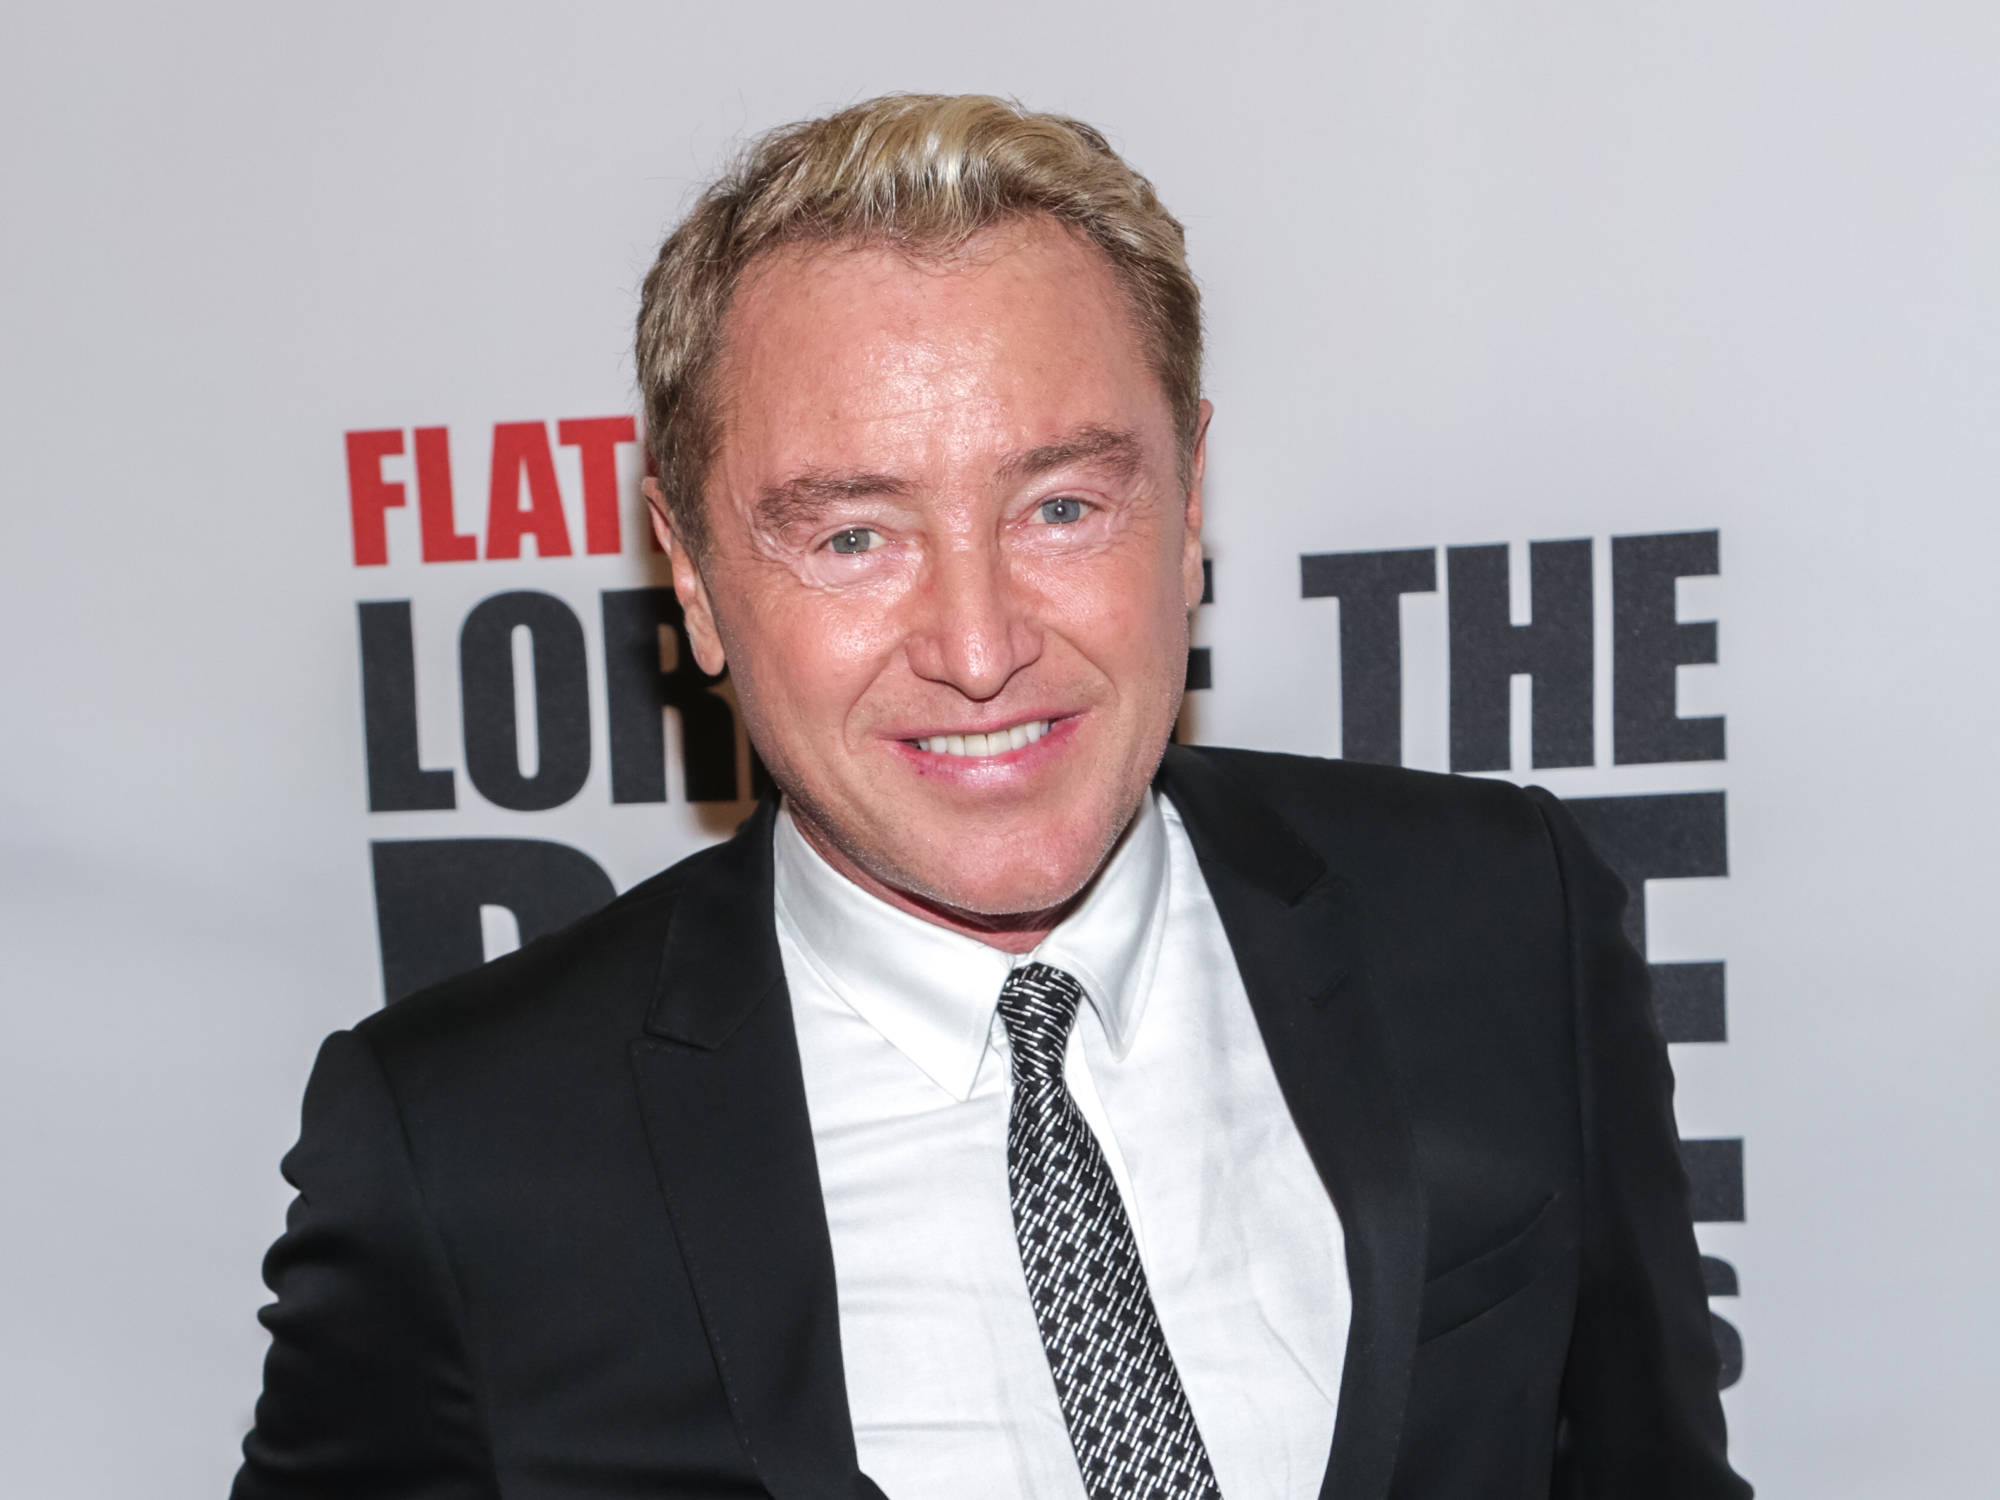 Michale Flatley Biography: Age, Net Worth, Parents, Spouses, Children, Siblings, Height, Instagram, Wiki